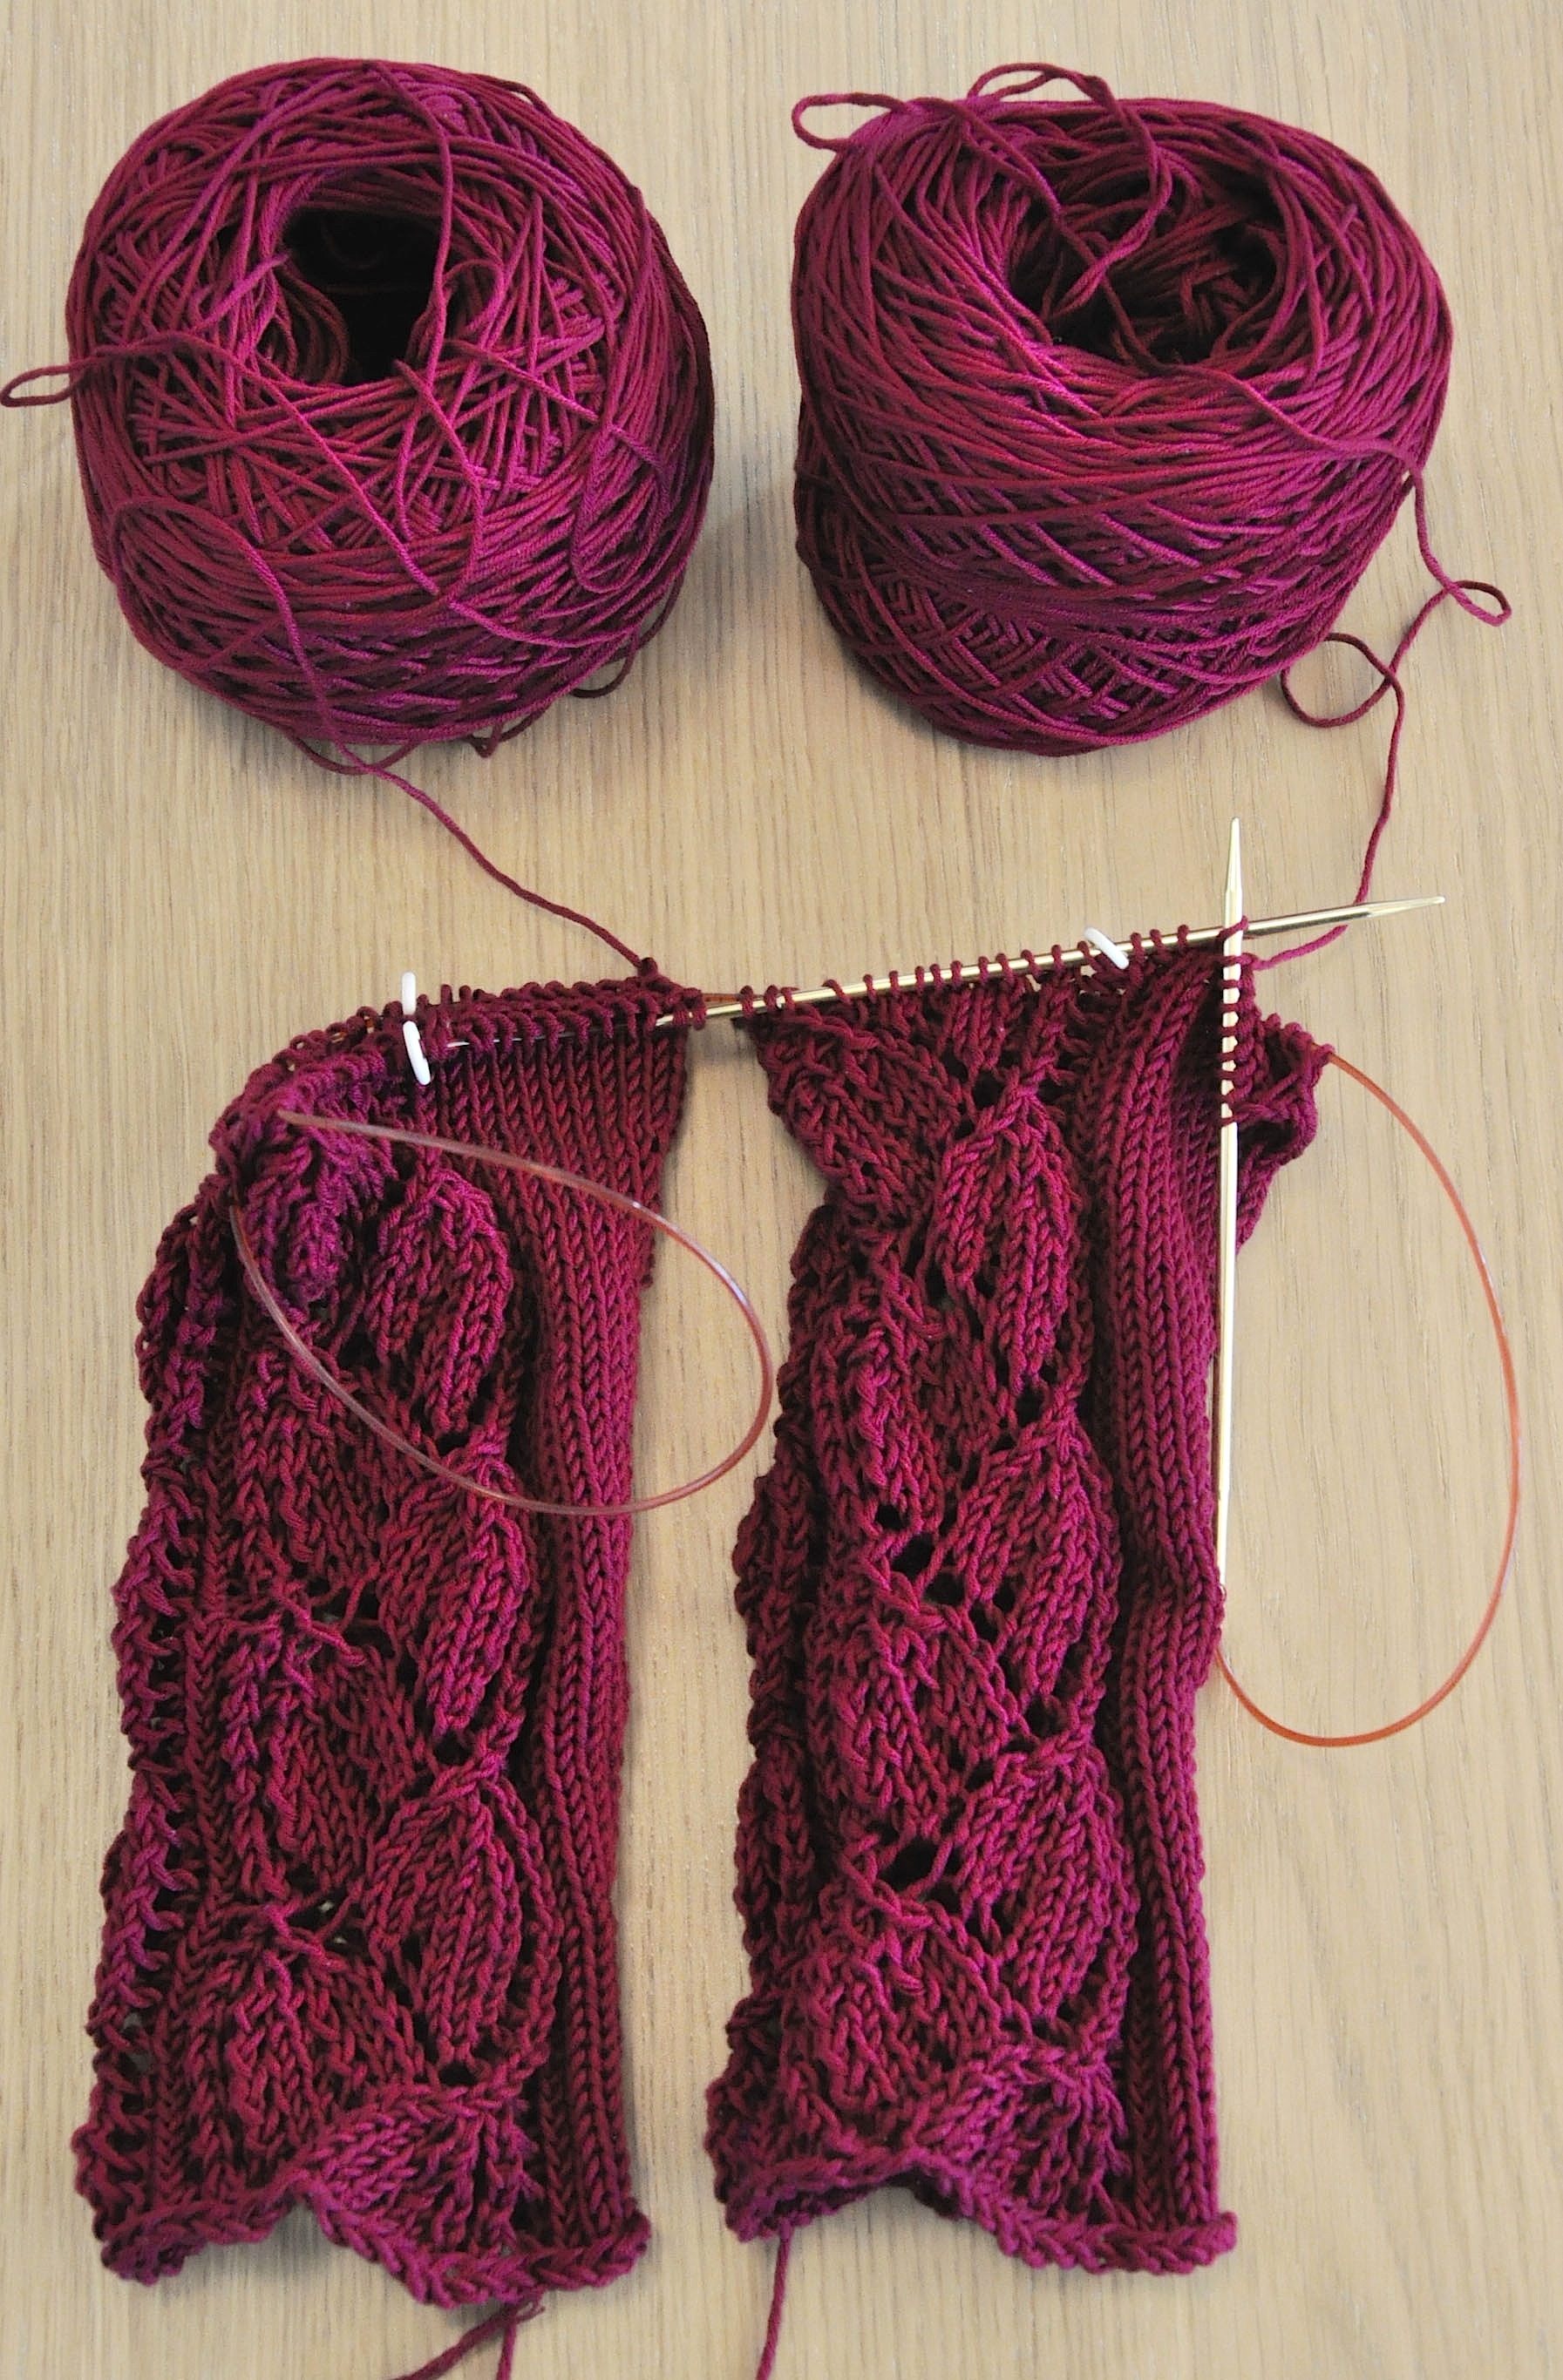 Magic Loop (How to knit in the round with circular knitting needles)